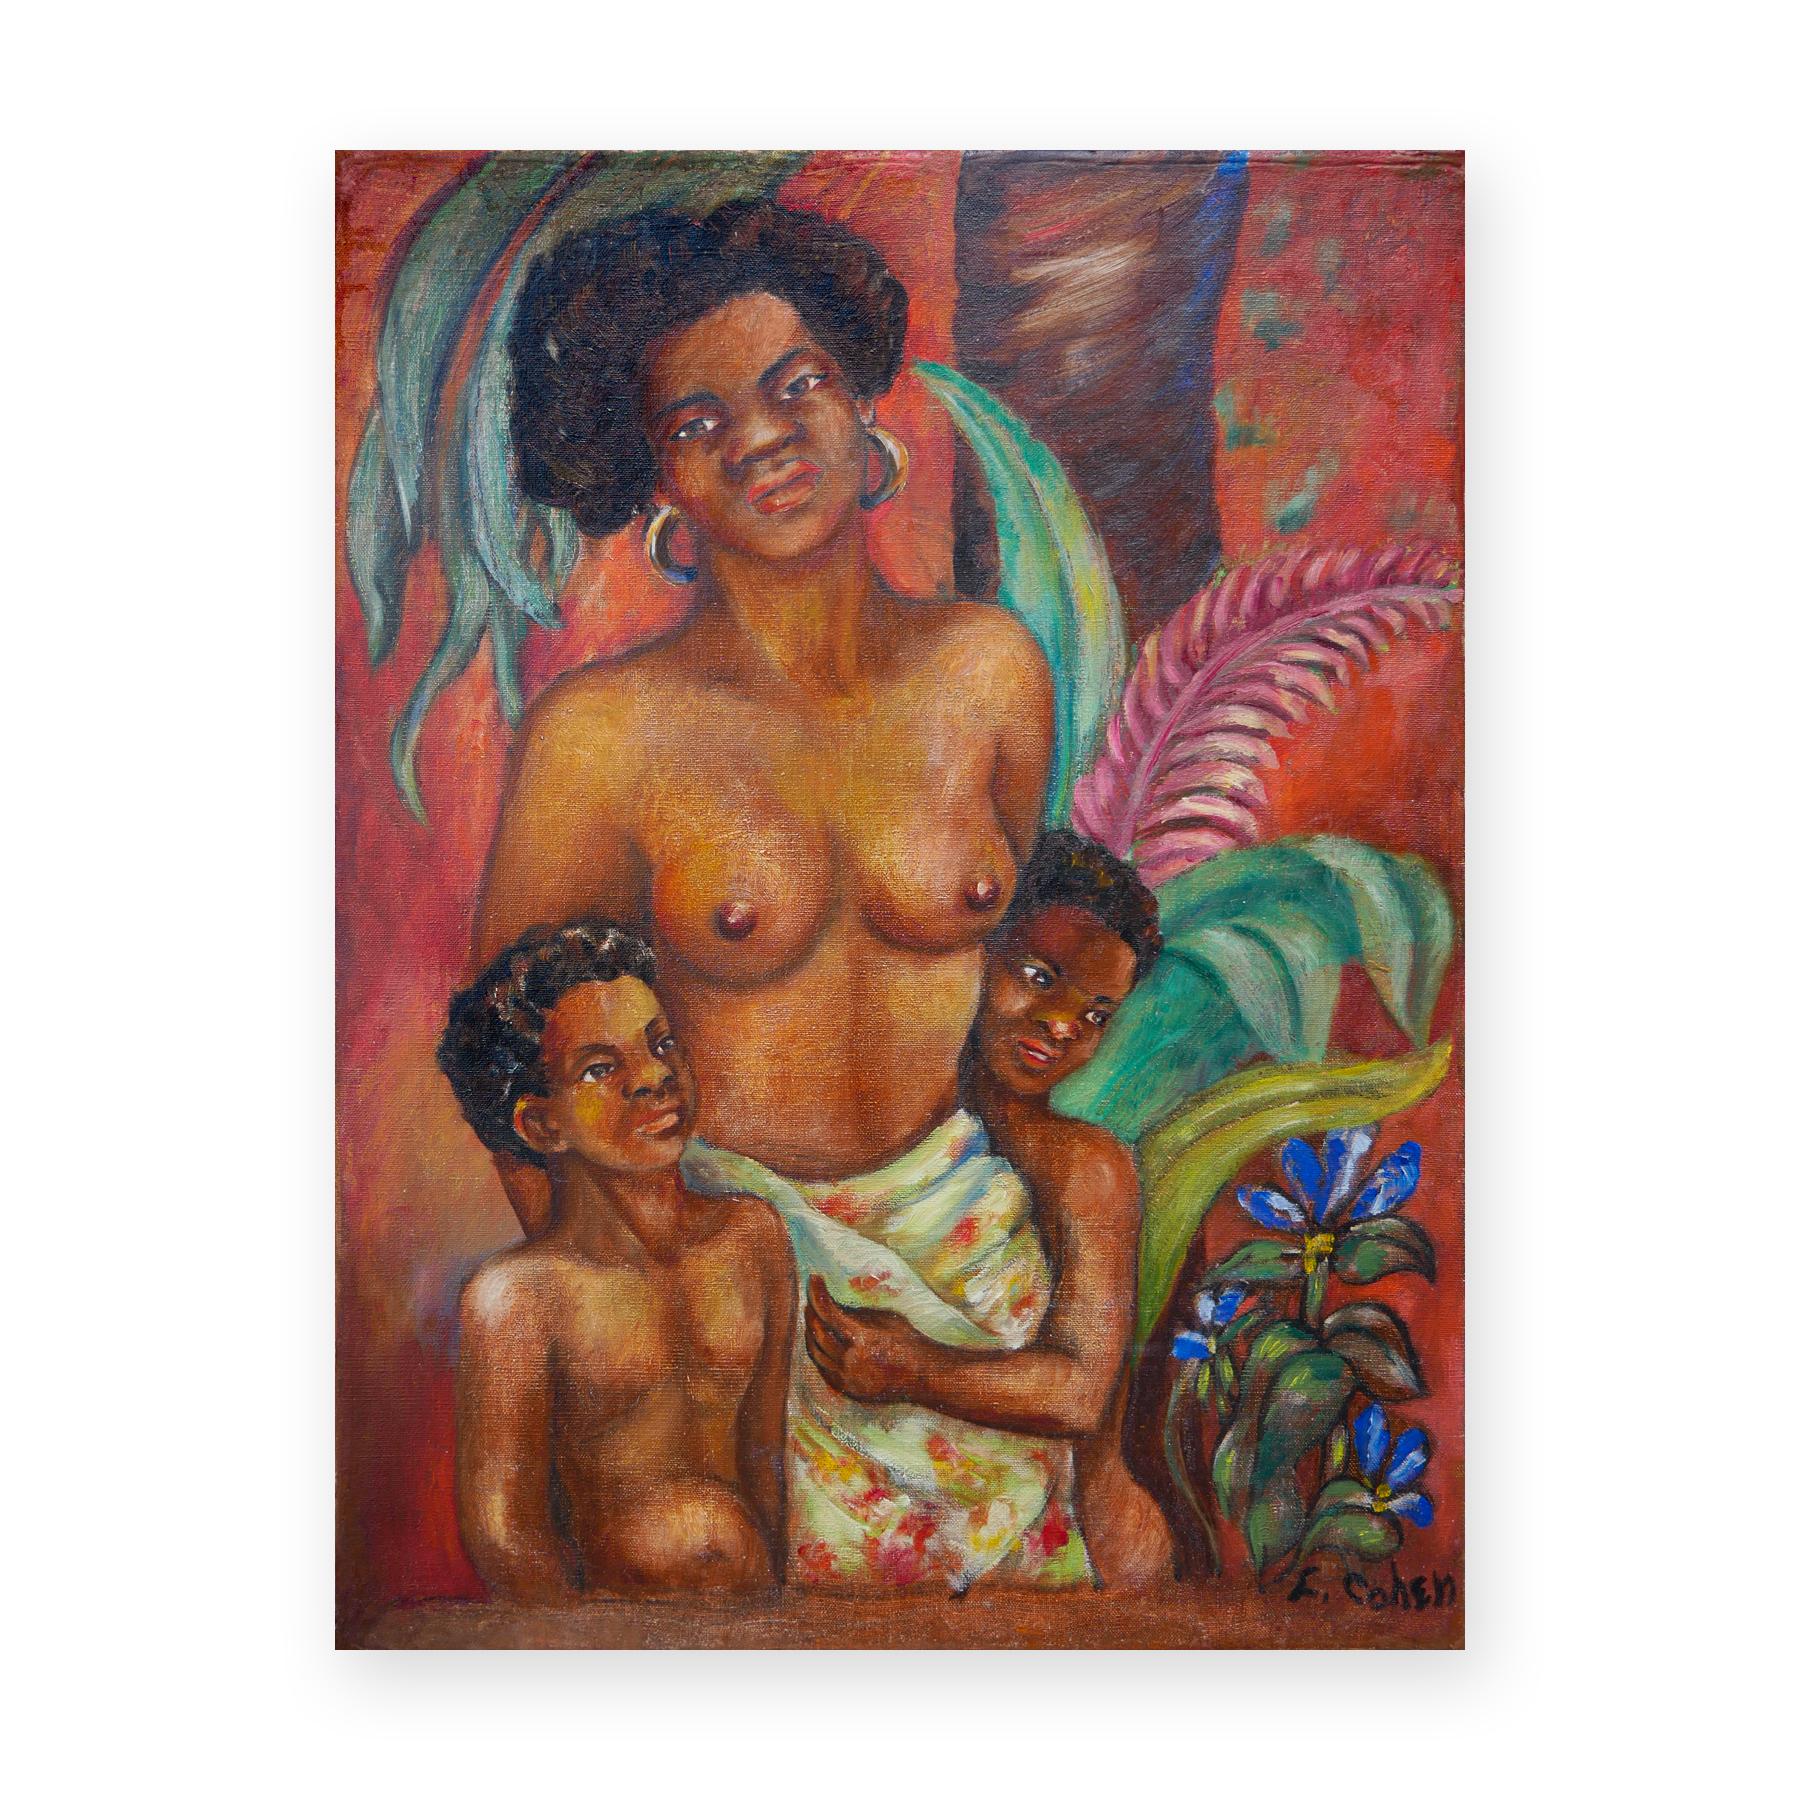 Warm-Toned Abstract Figurative Black Art Portrait of a Mother with Children - Painting by F. Cohen